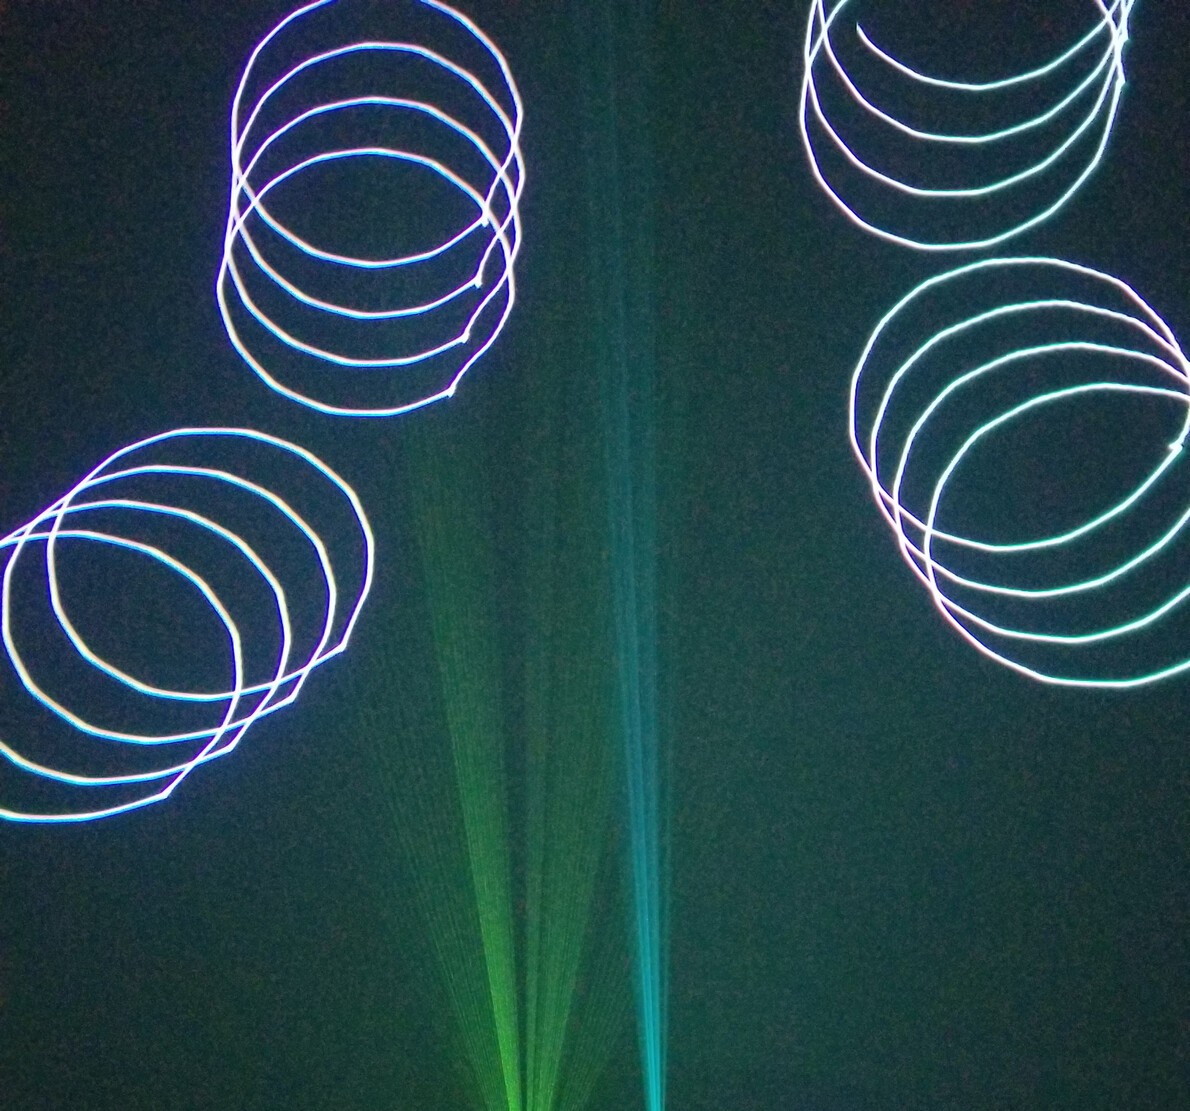 laser image with green and cyclinder-like swirls